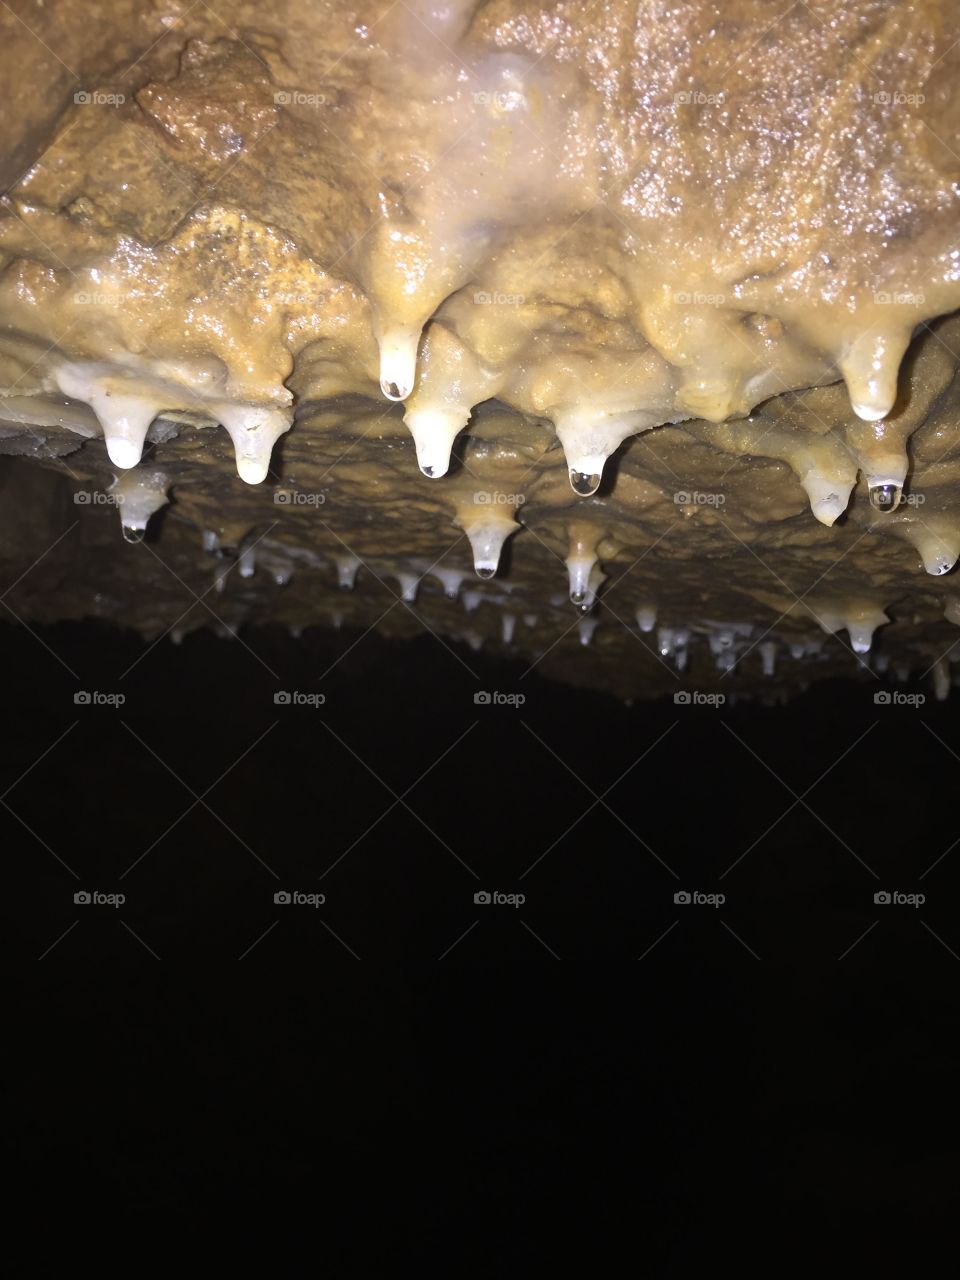 Drops of water hanging off of small stalactites beautifully highlighted by the pitch black background